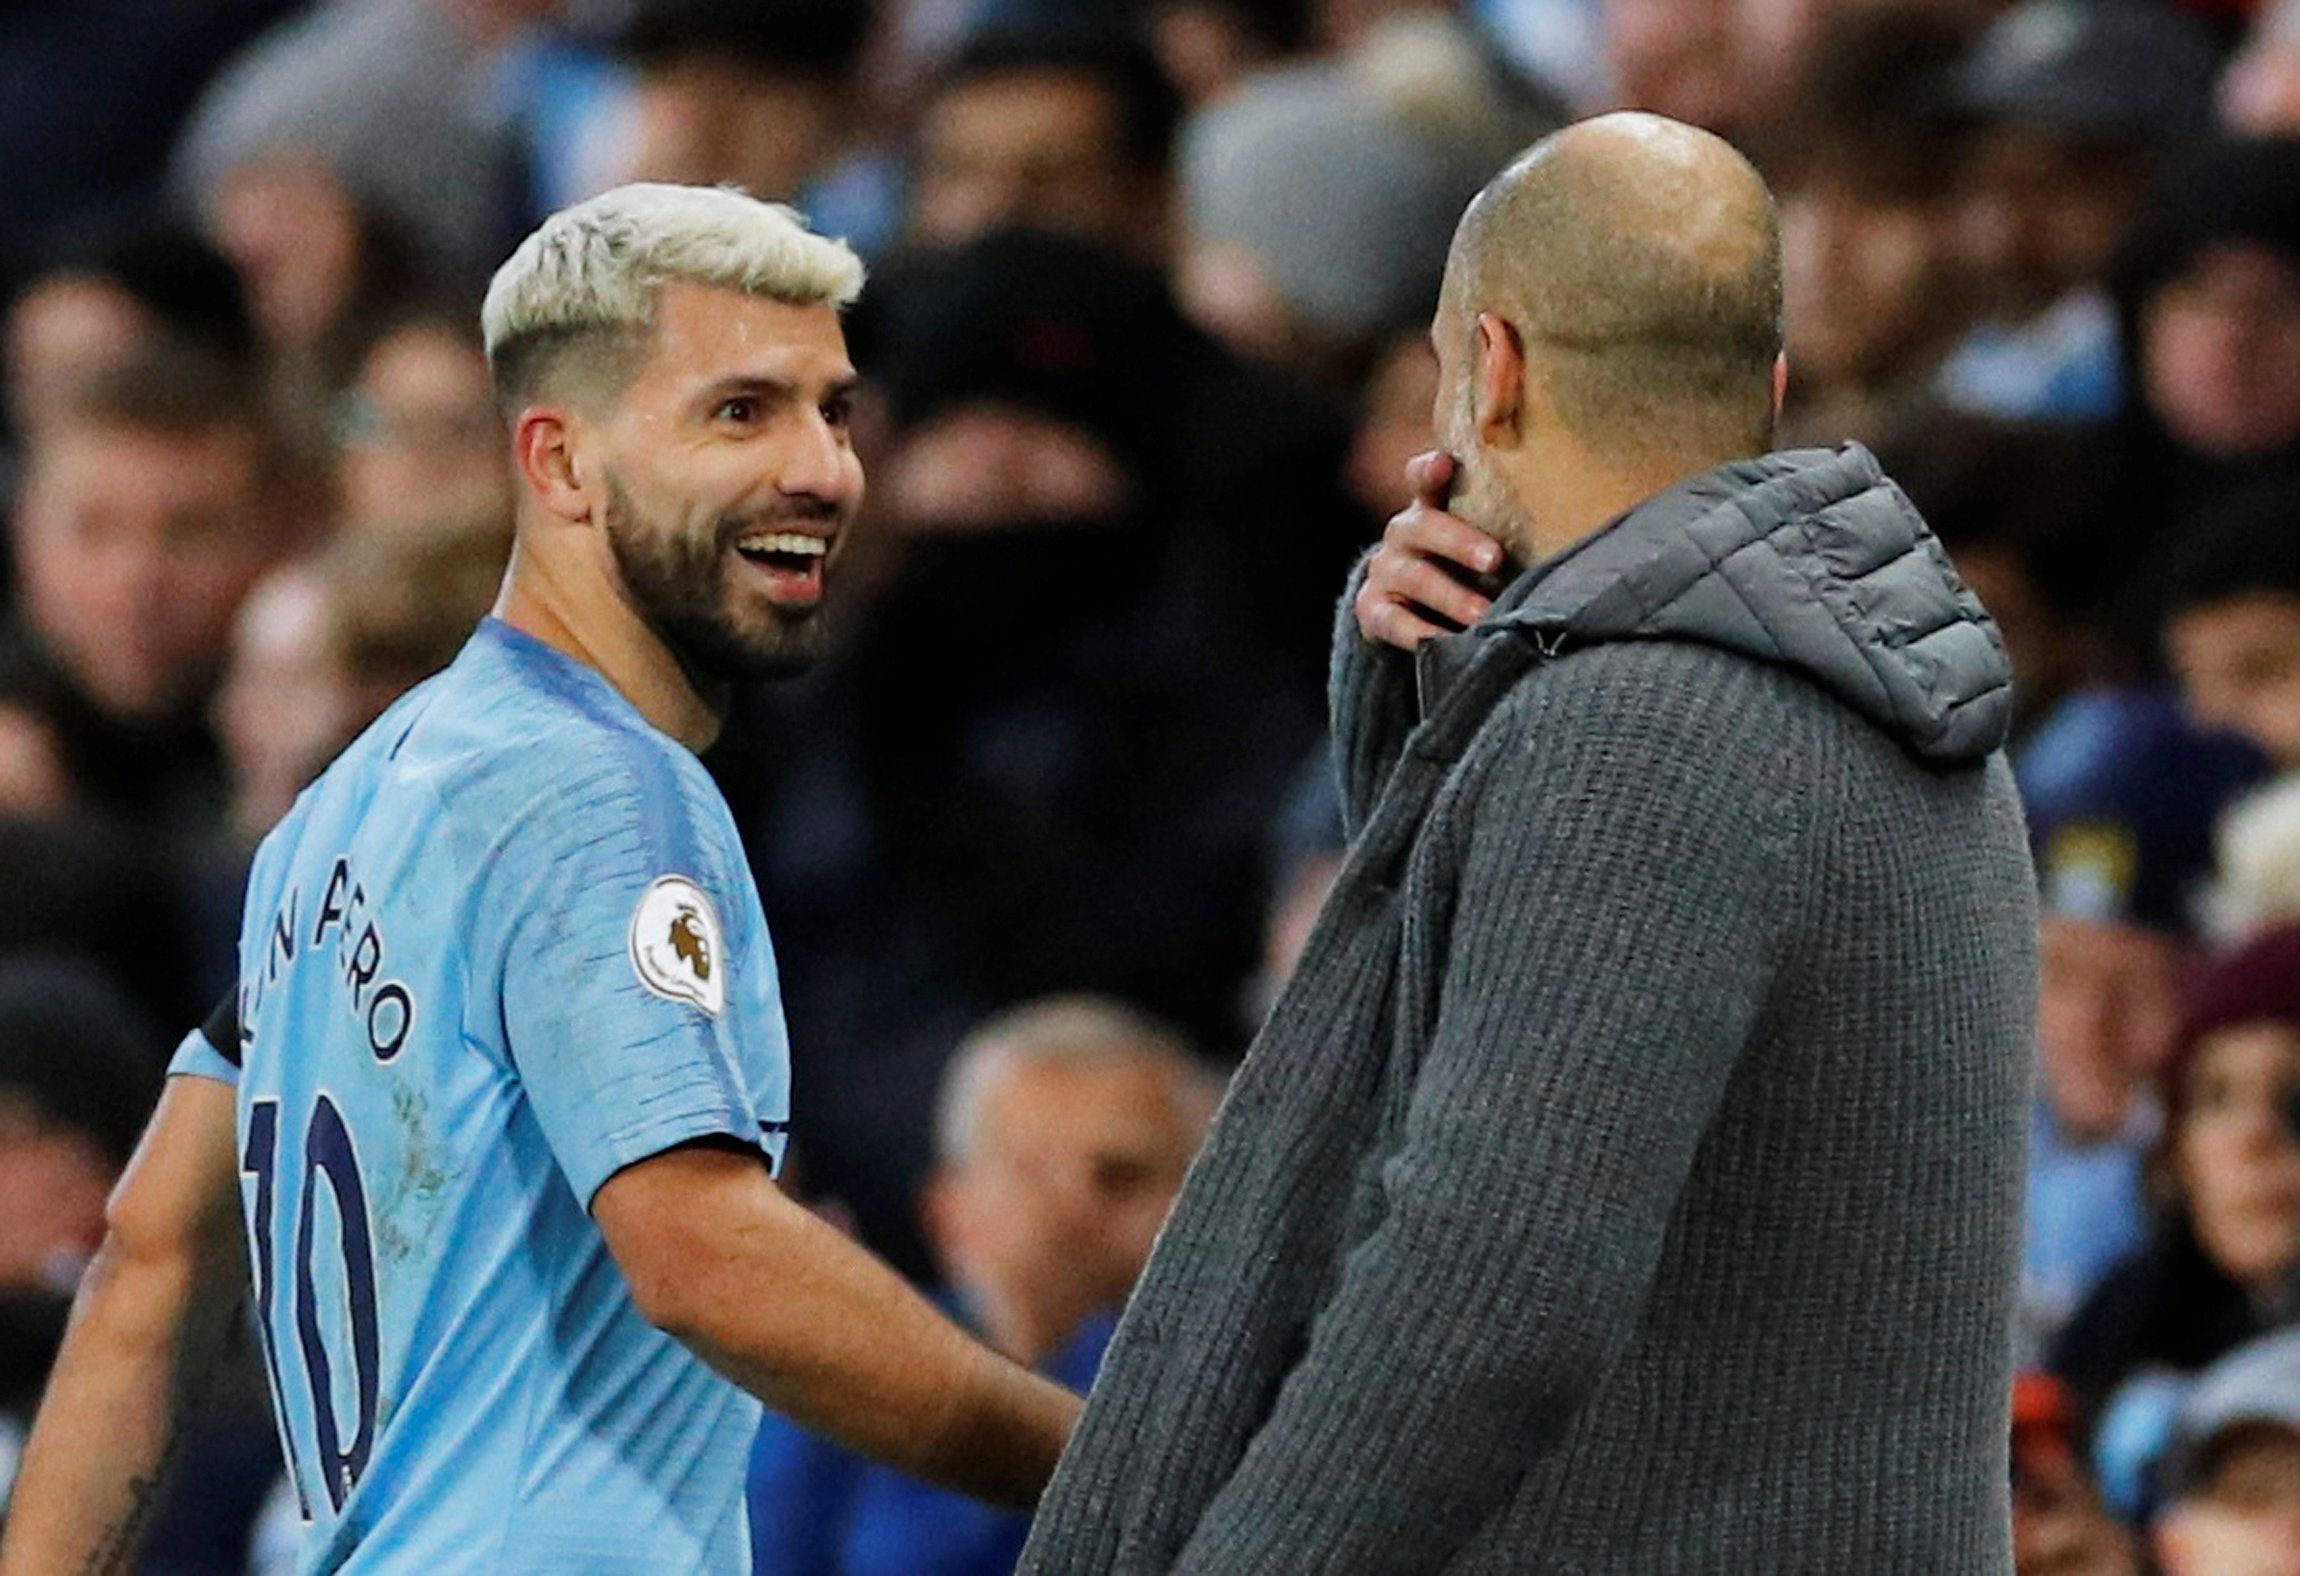 Soccer Football - Premier League - Manchester City v Chelsea - Etihad Stadium, Manchester, Britain - February 10, 2019  Manchester City's Sergio Aguero is substituted and speaks with manager Pep Guardiola            REUTERS/Phil Noble  EDITORIAL USE ONLY. No use with unauthorized audio, video, data, fixture lists, club/league logos or 